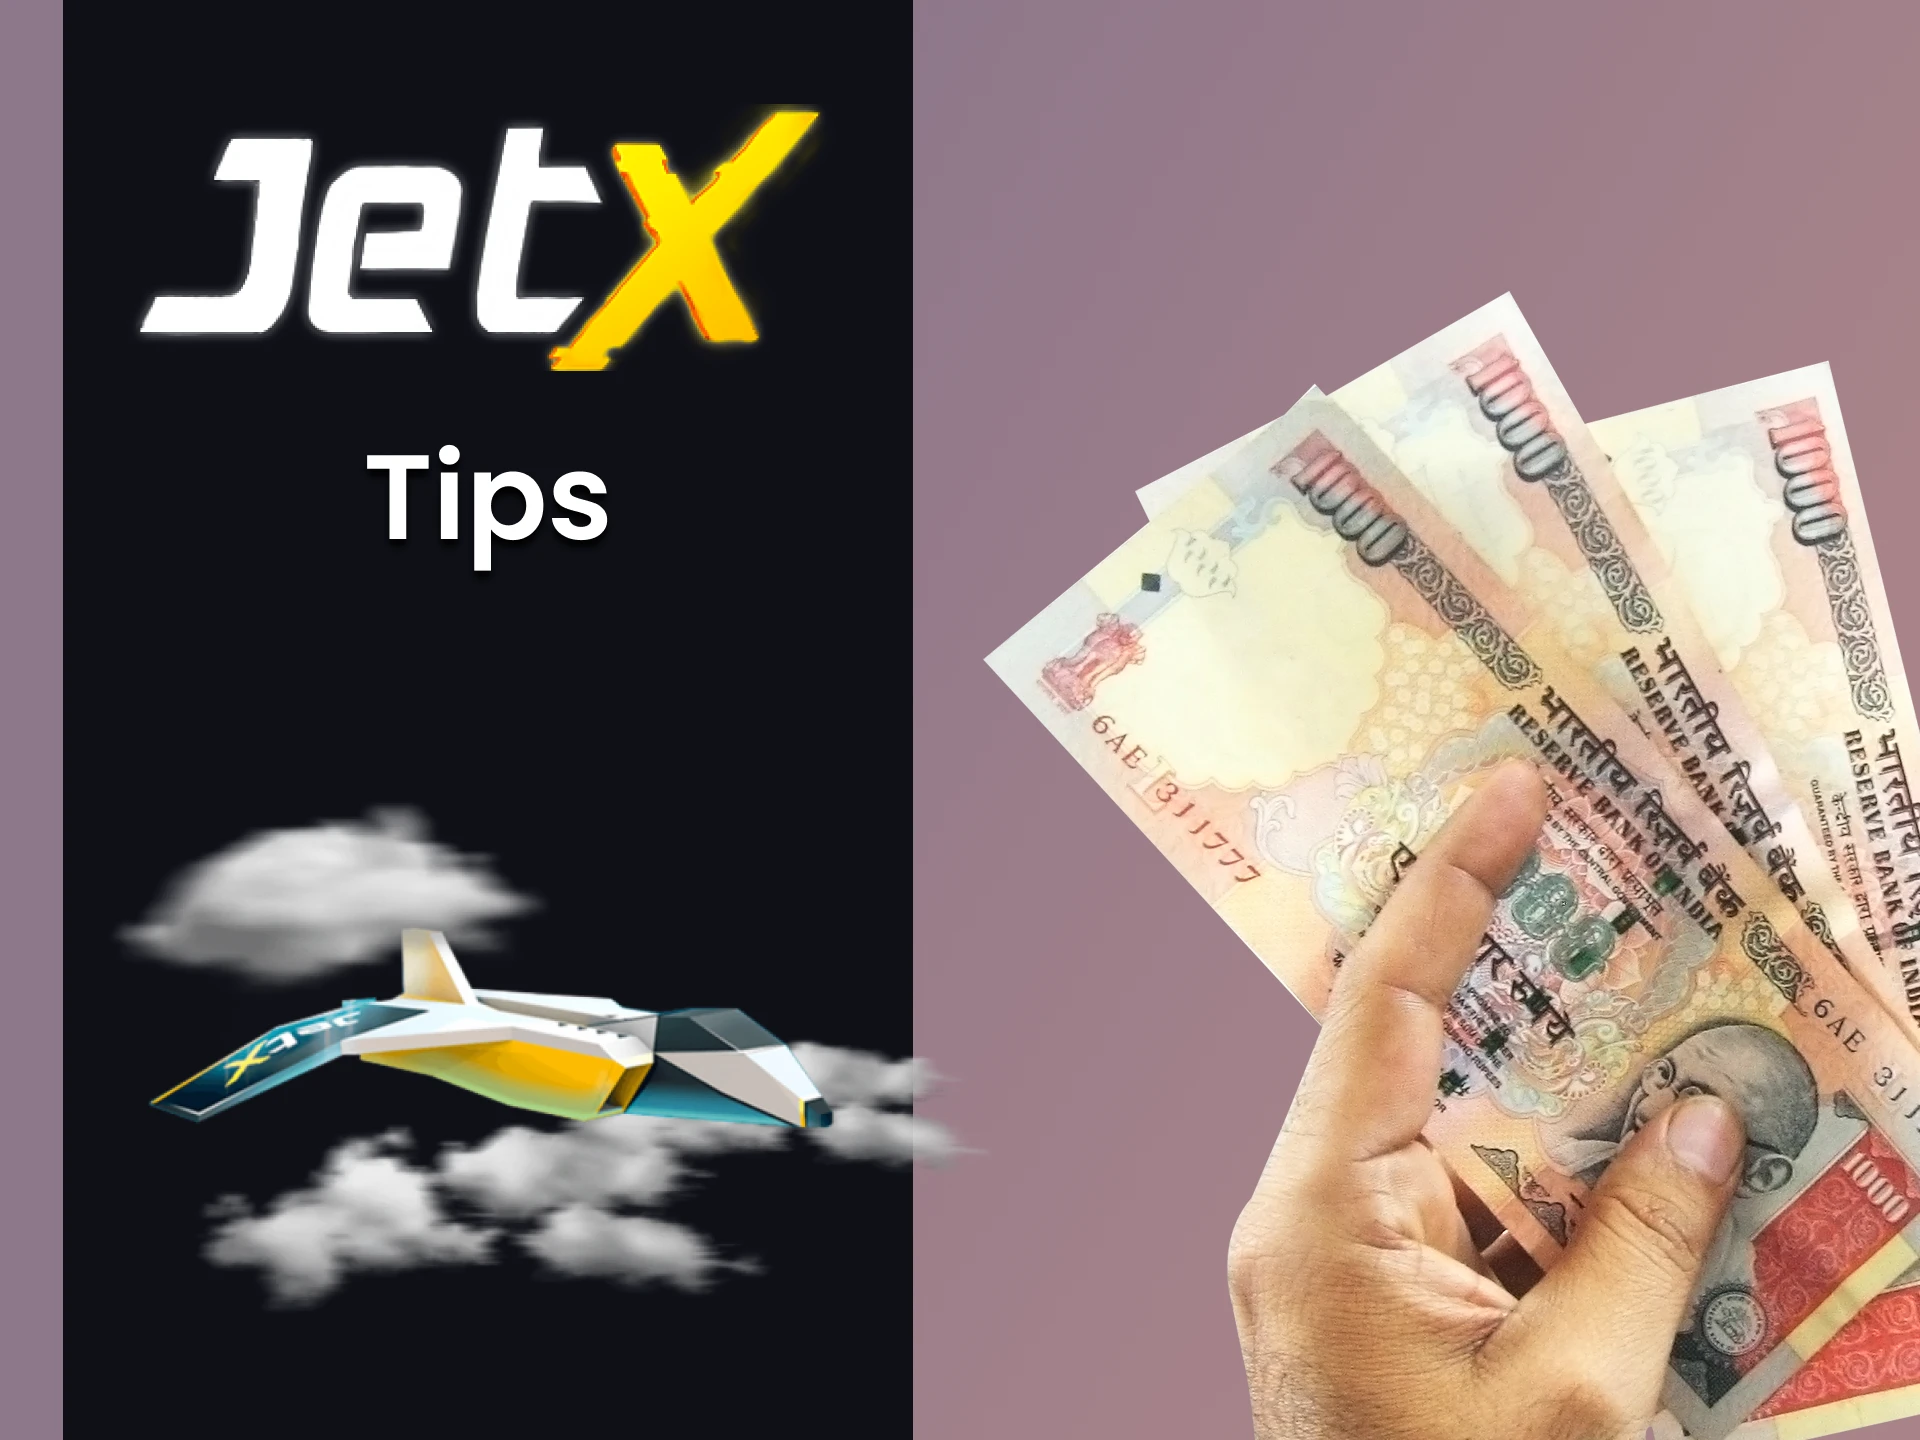 You can get tips for JetX game.